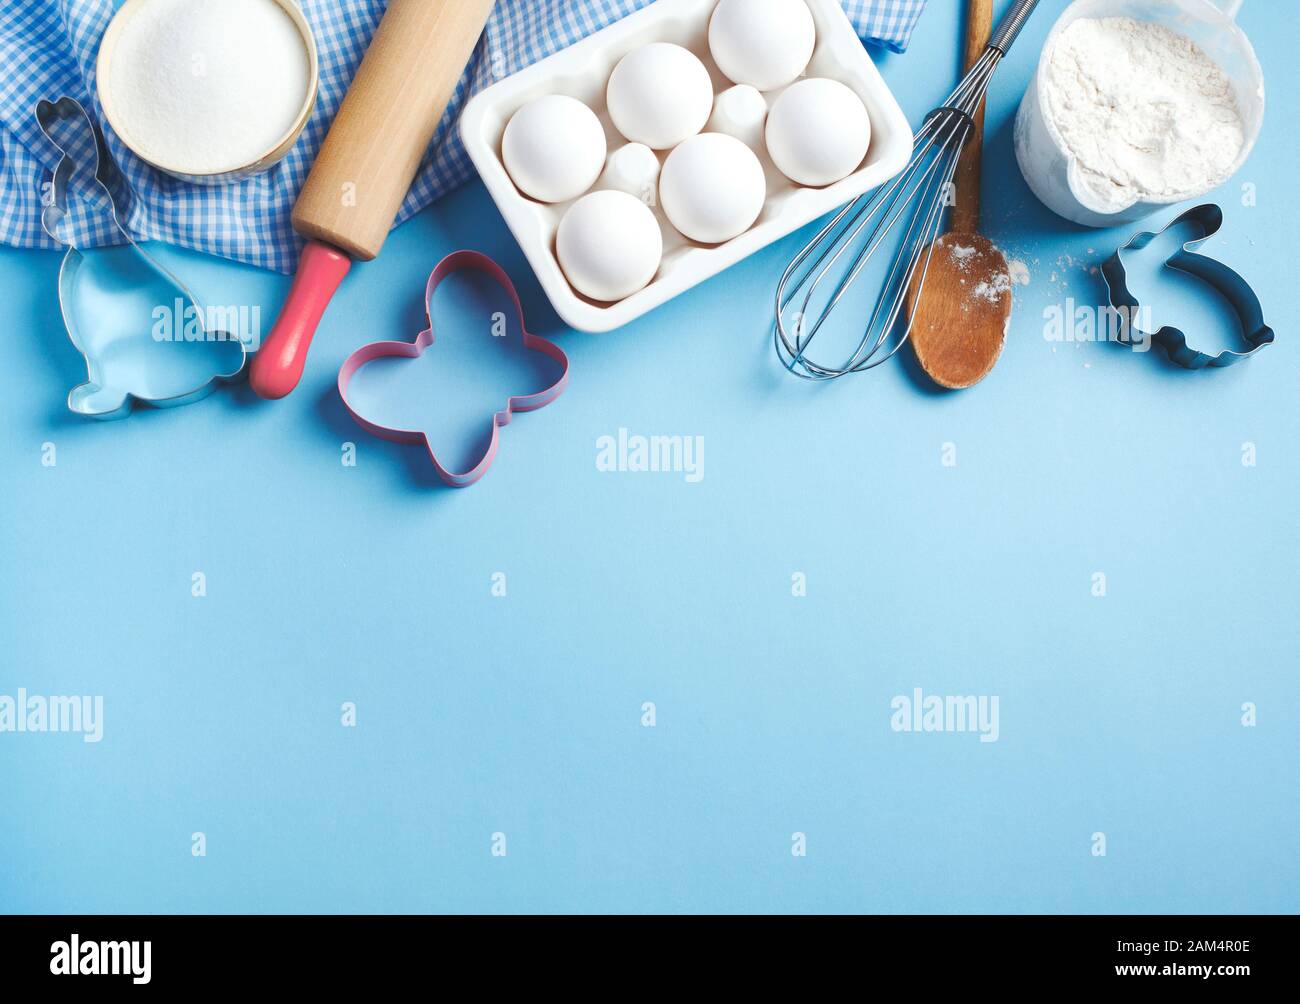 https://c8.alamy.com/comp/2AM4R0E/baking-background-frame-preparation-for-easter-baking-ingredients-and-kitchen-items-for-baking-kitchen-utensils-flour-eggs-sugar-top-view-copy-2AM4R0E.jpg